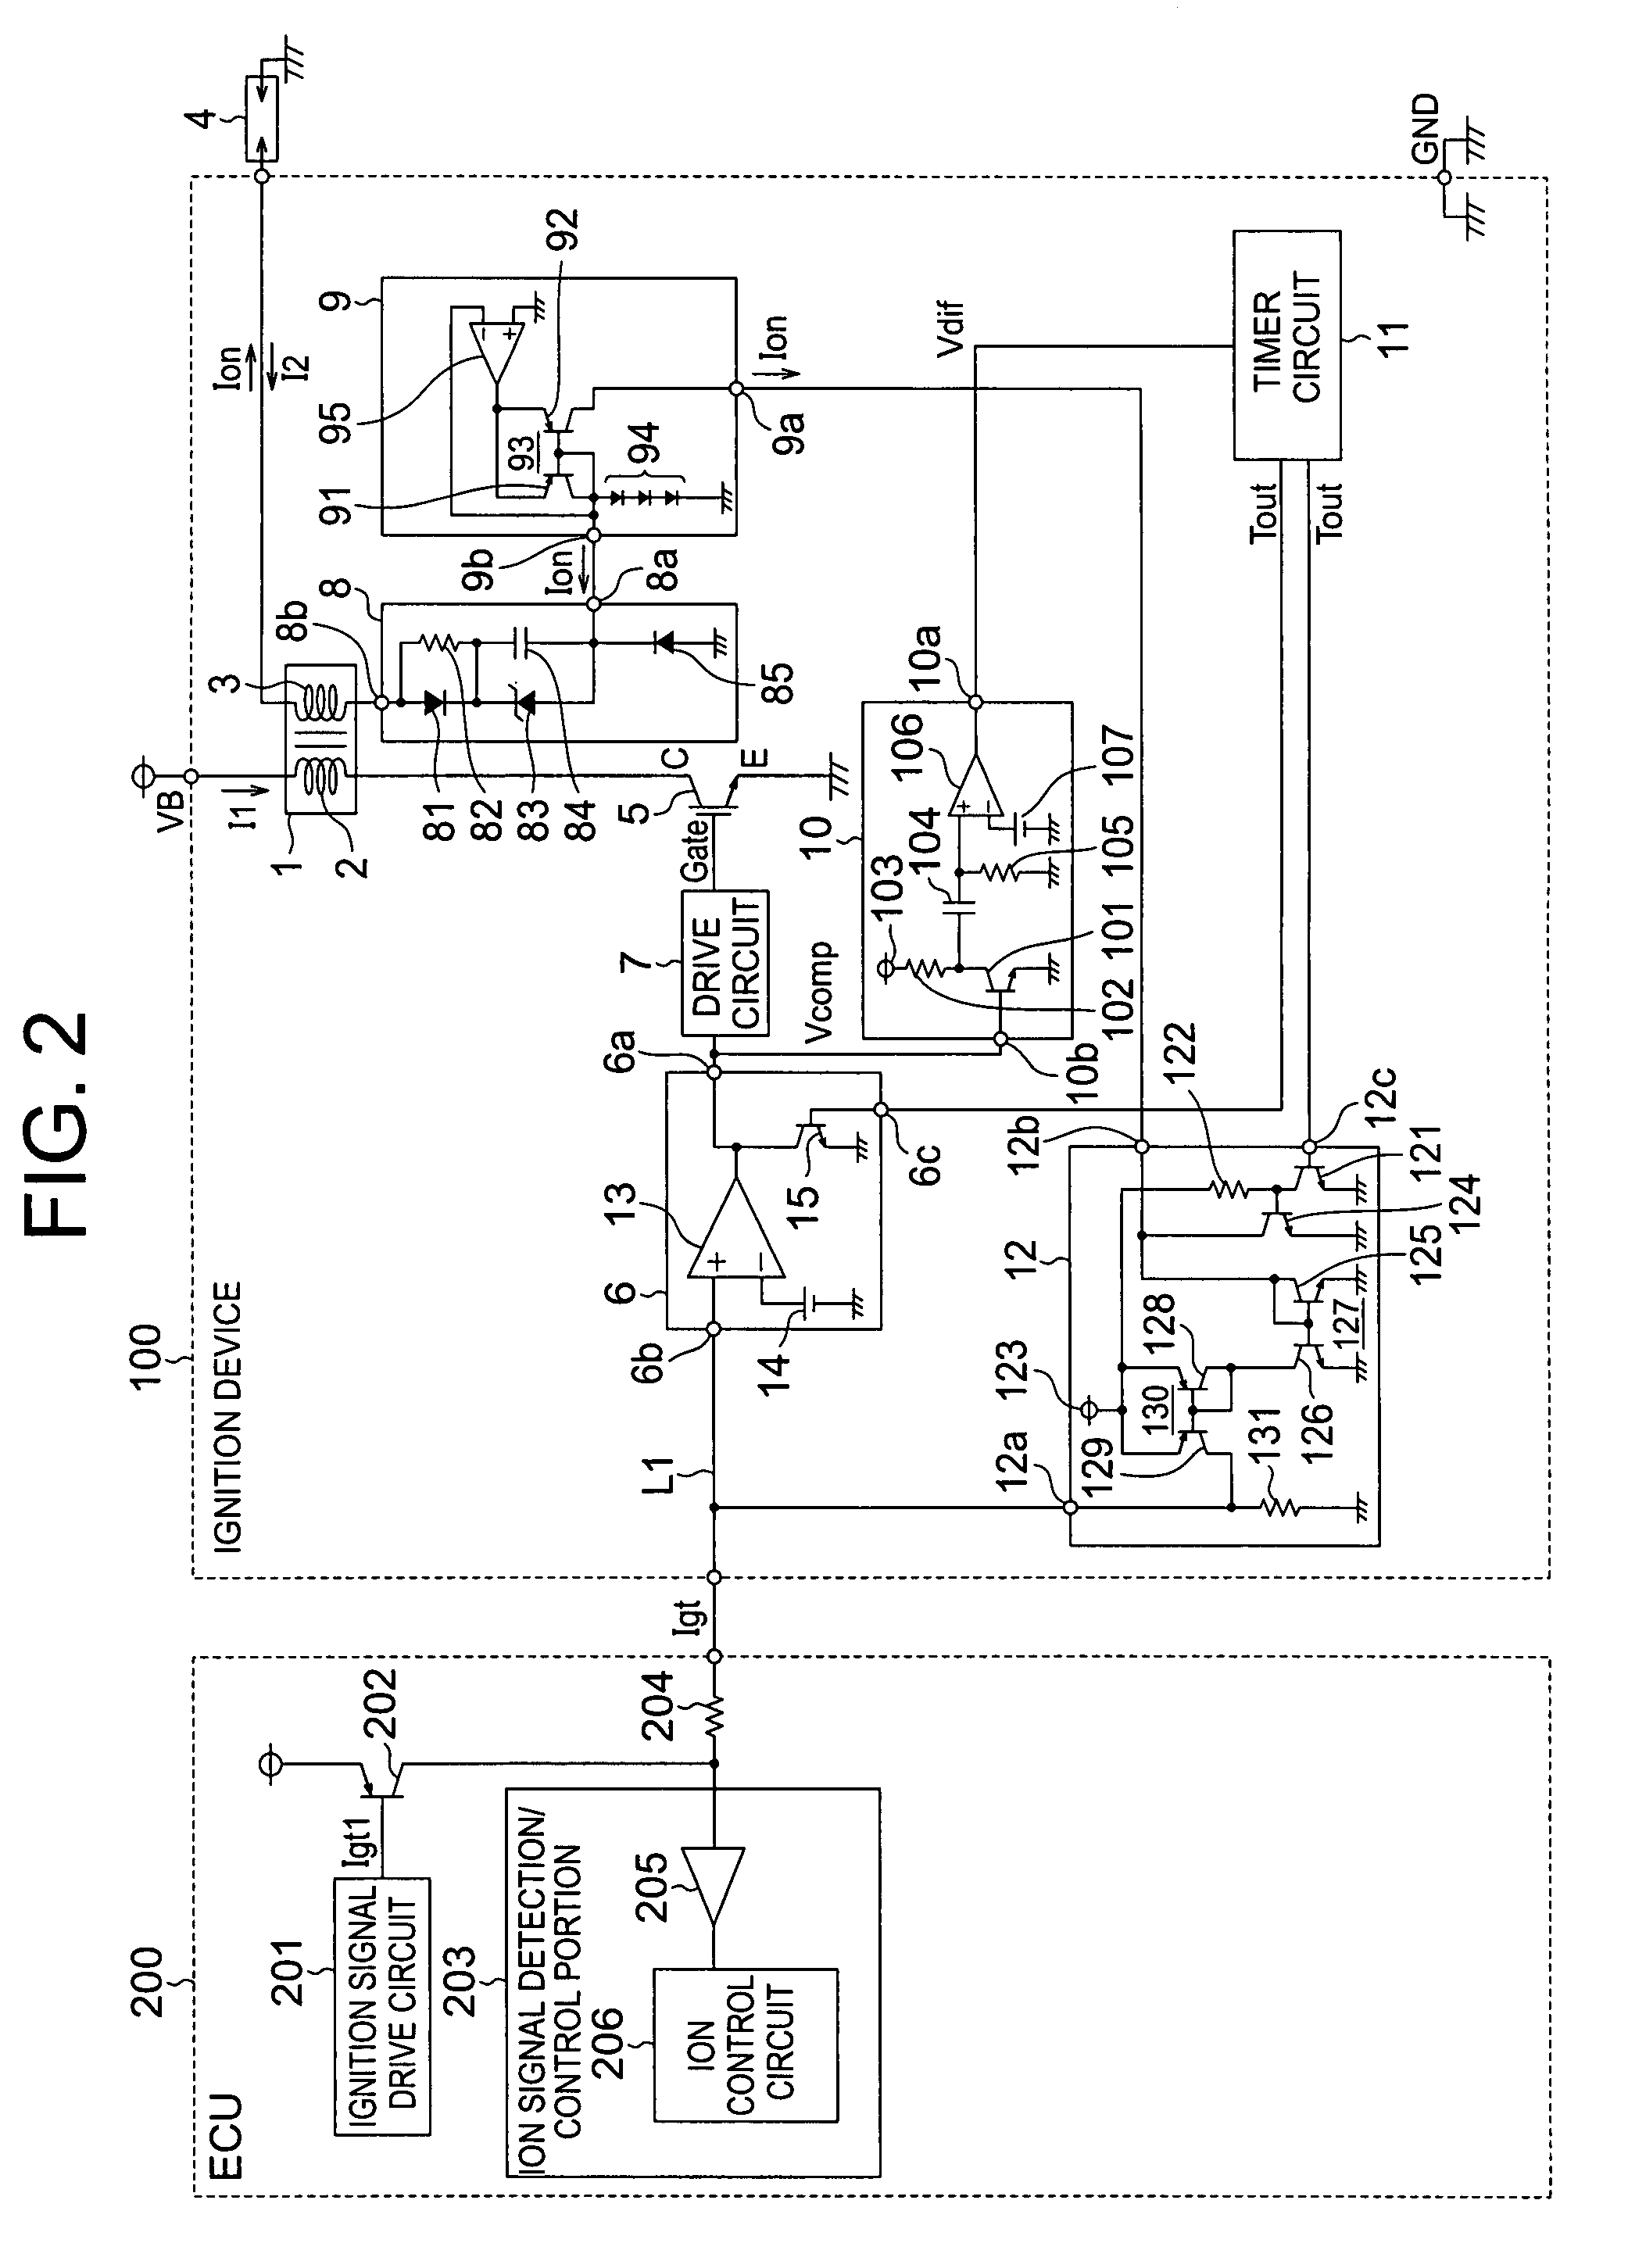 Ignition device of ignition control system for an internal combustion engine